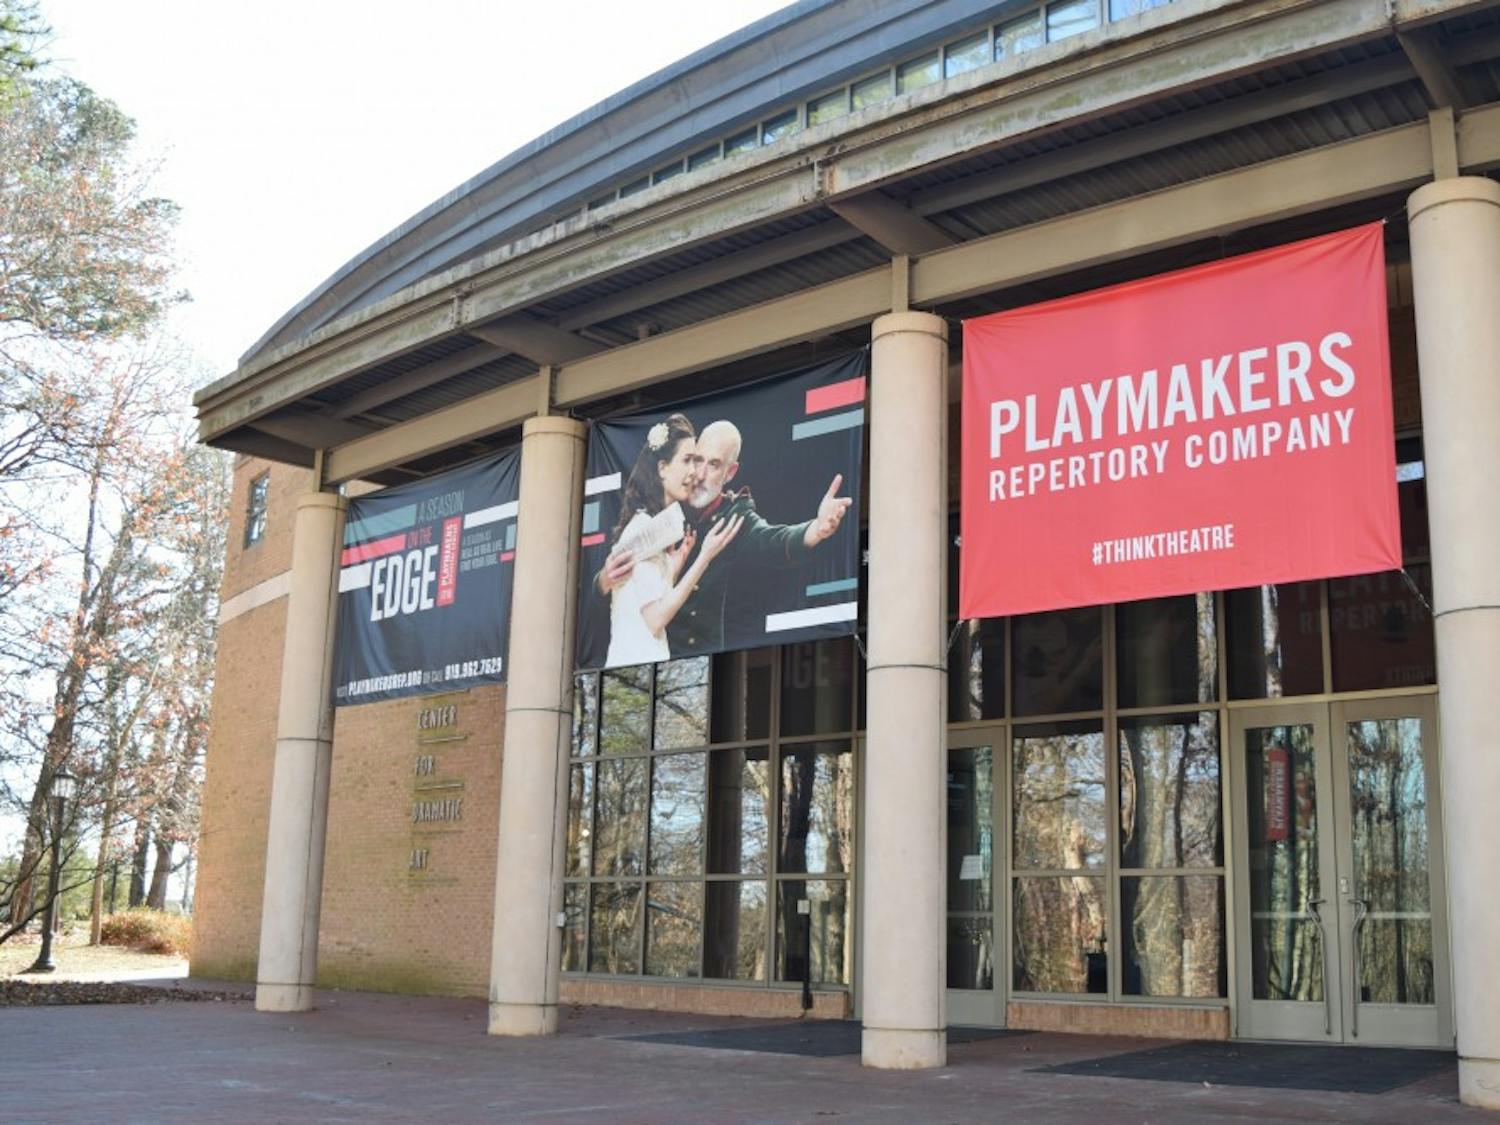 The PlayMakers Repertory Company is a professional theatre company in residence at UNC Chapel Hill.